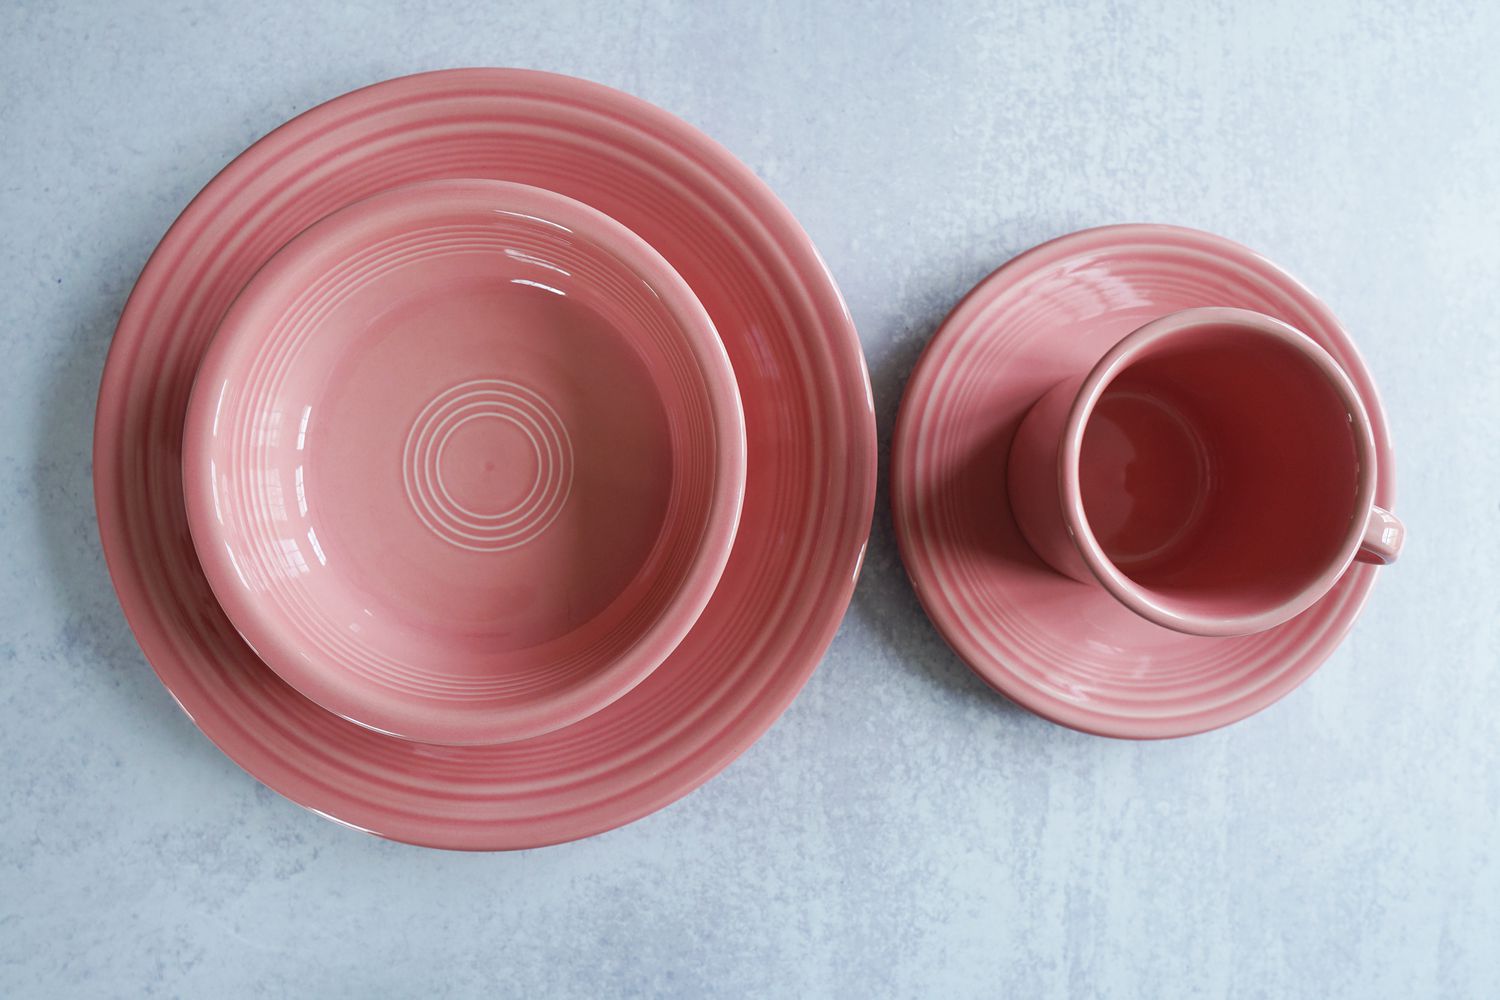 Two pink plates, a pink bowl, and a pink mug on a grey suface